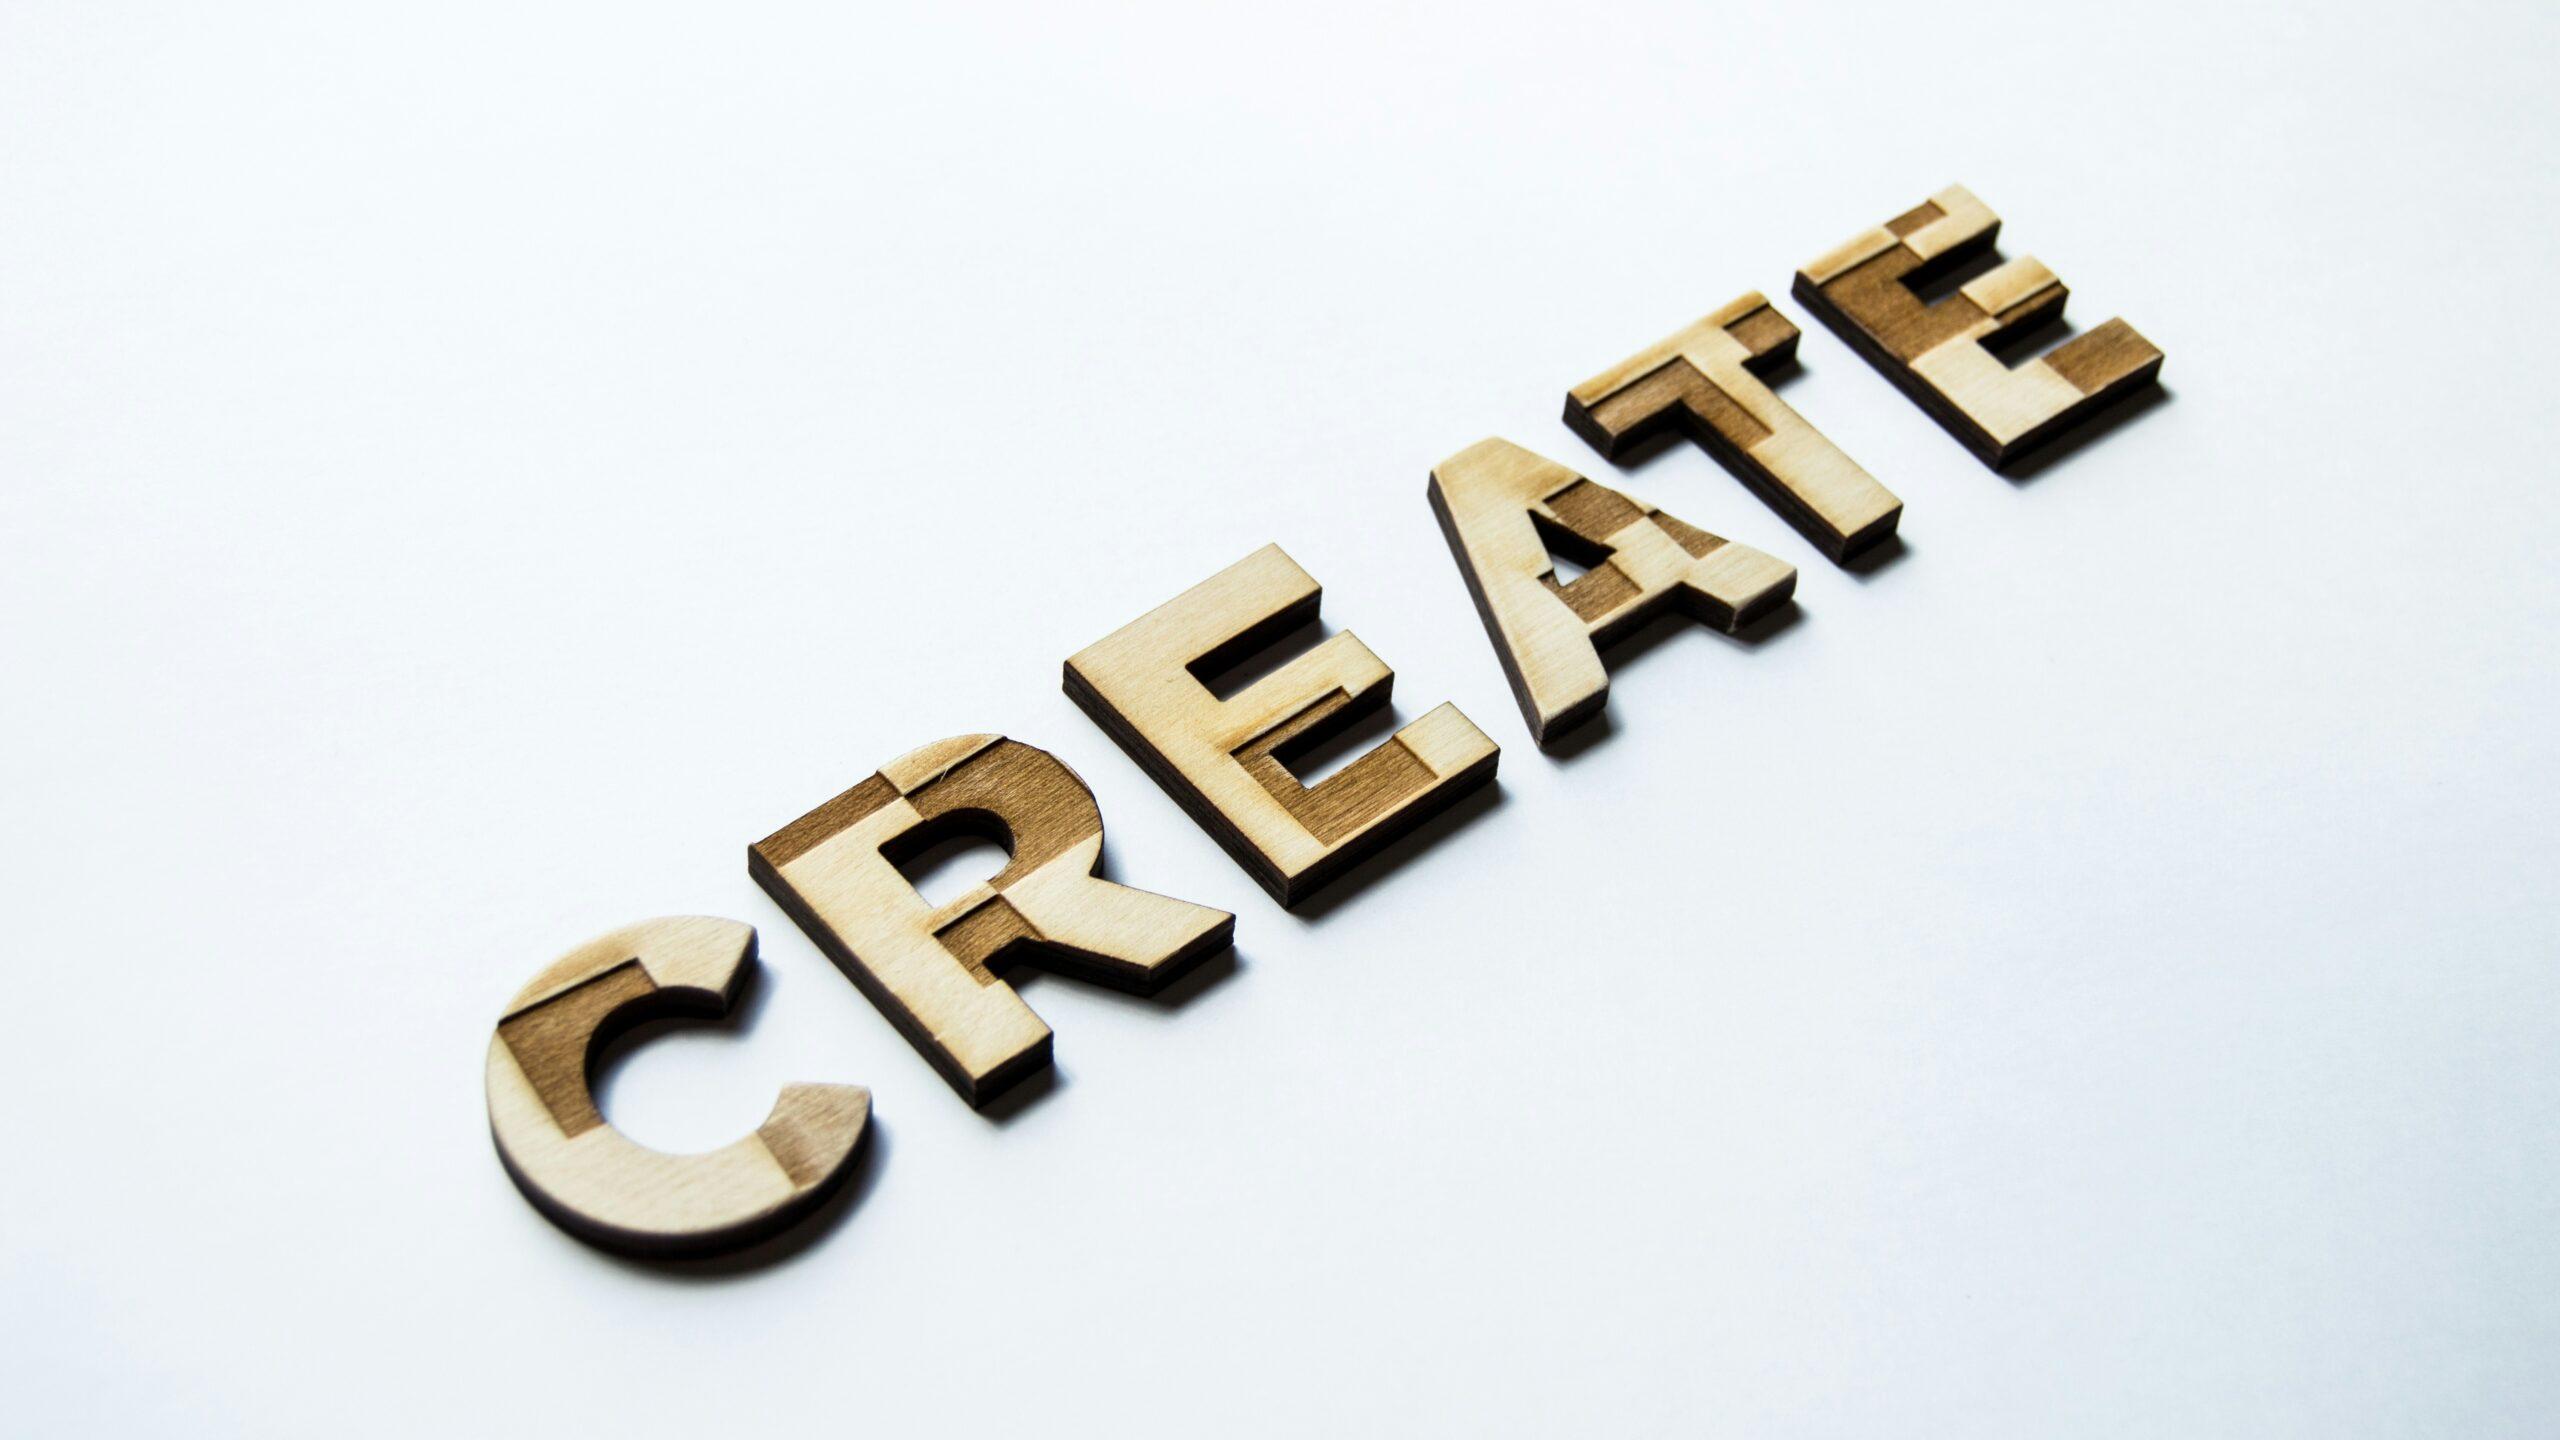 The word 'create' formed in wooden block letters against a white background.